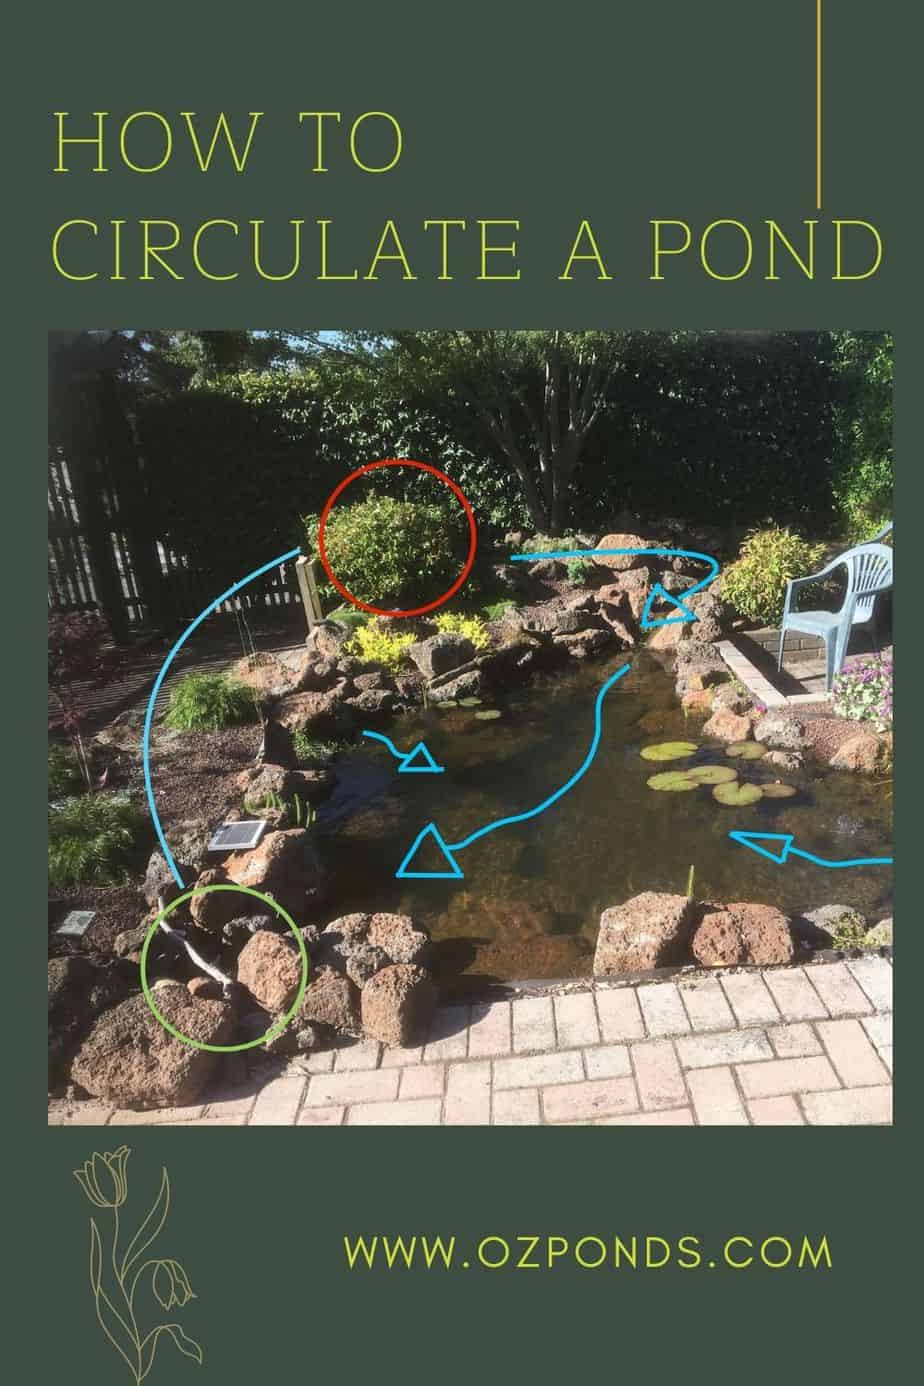 The picture below shows a pond ecosystem